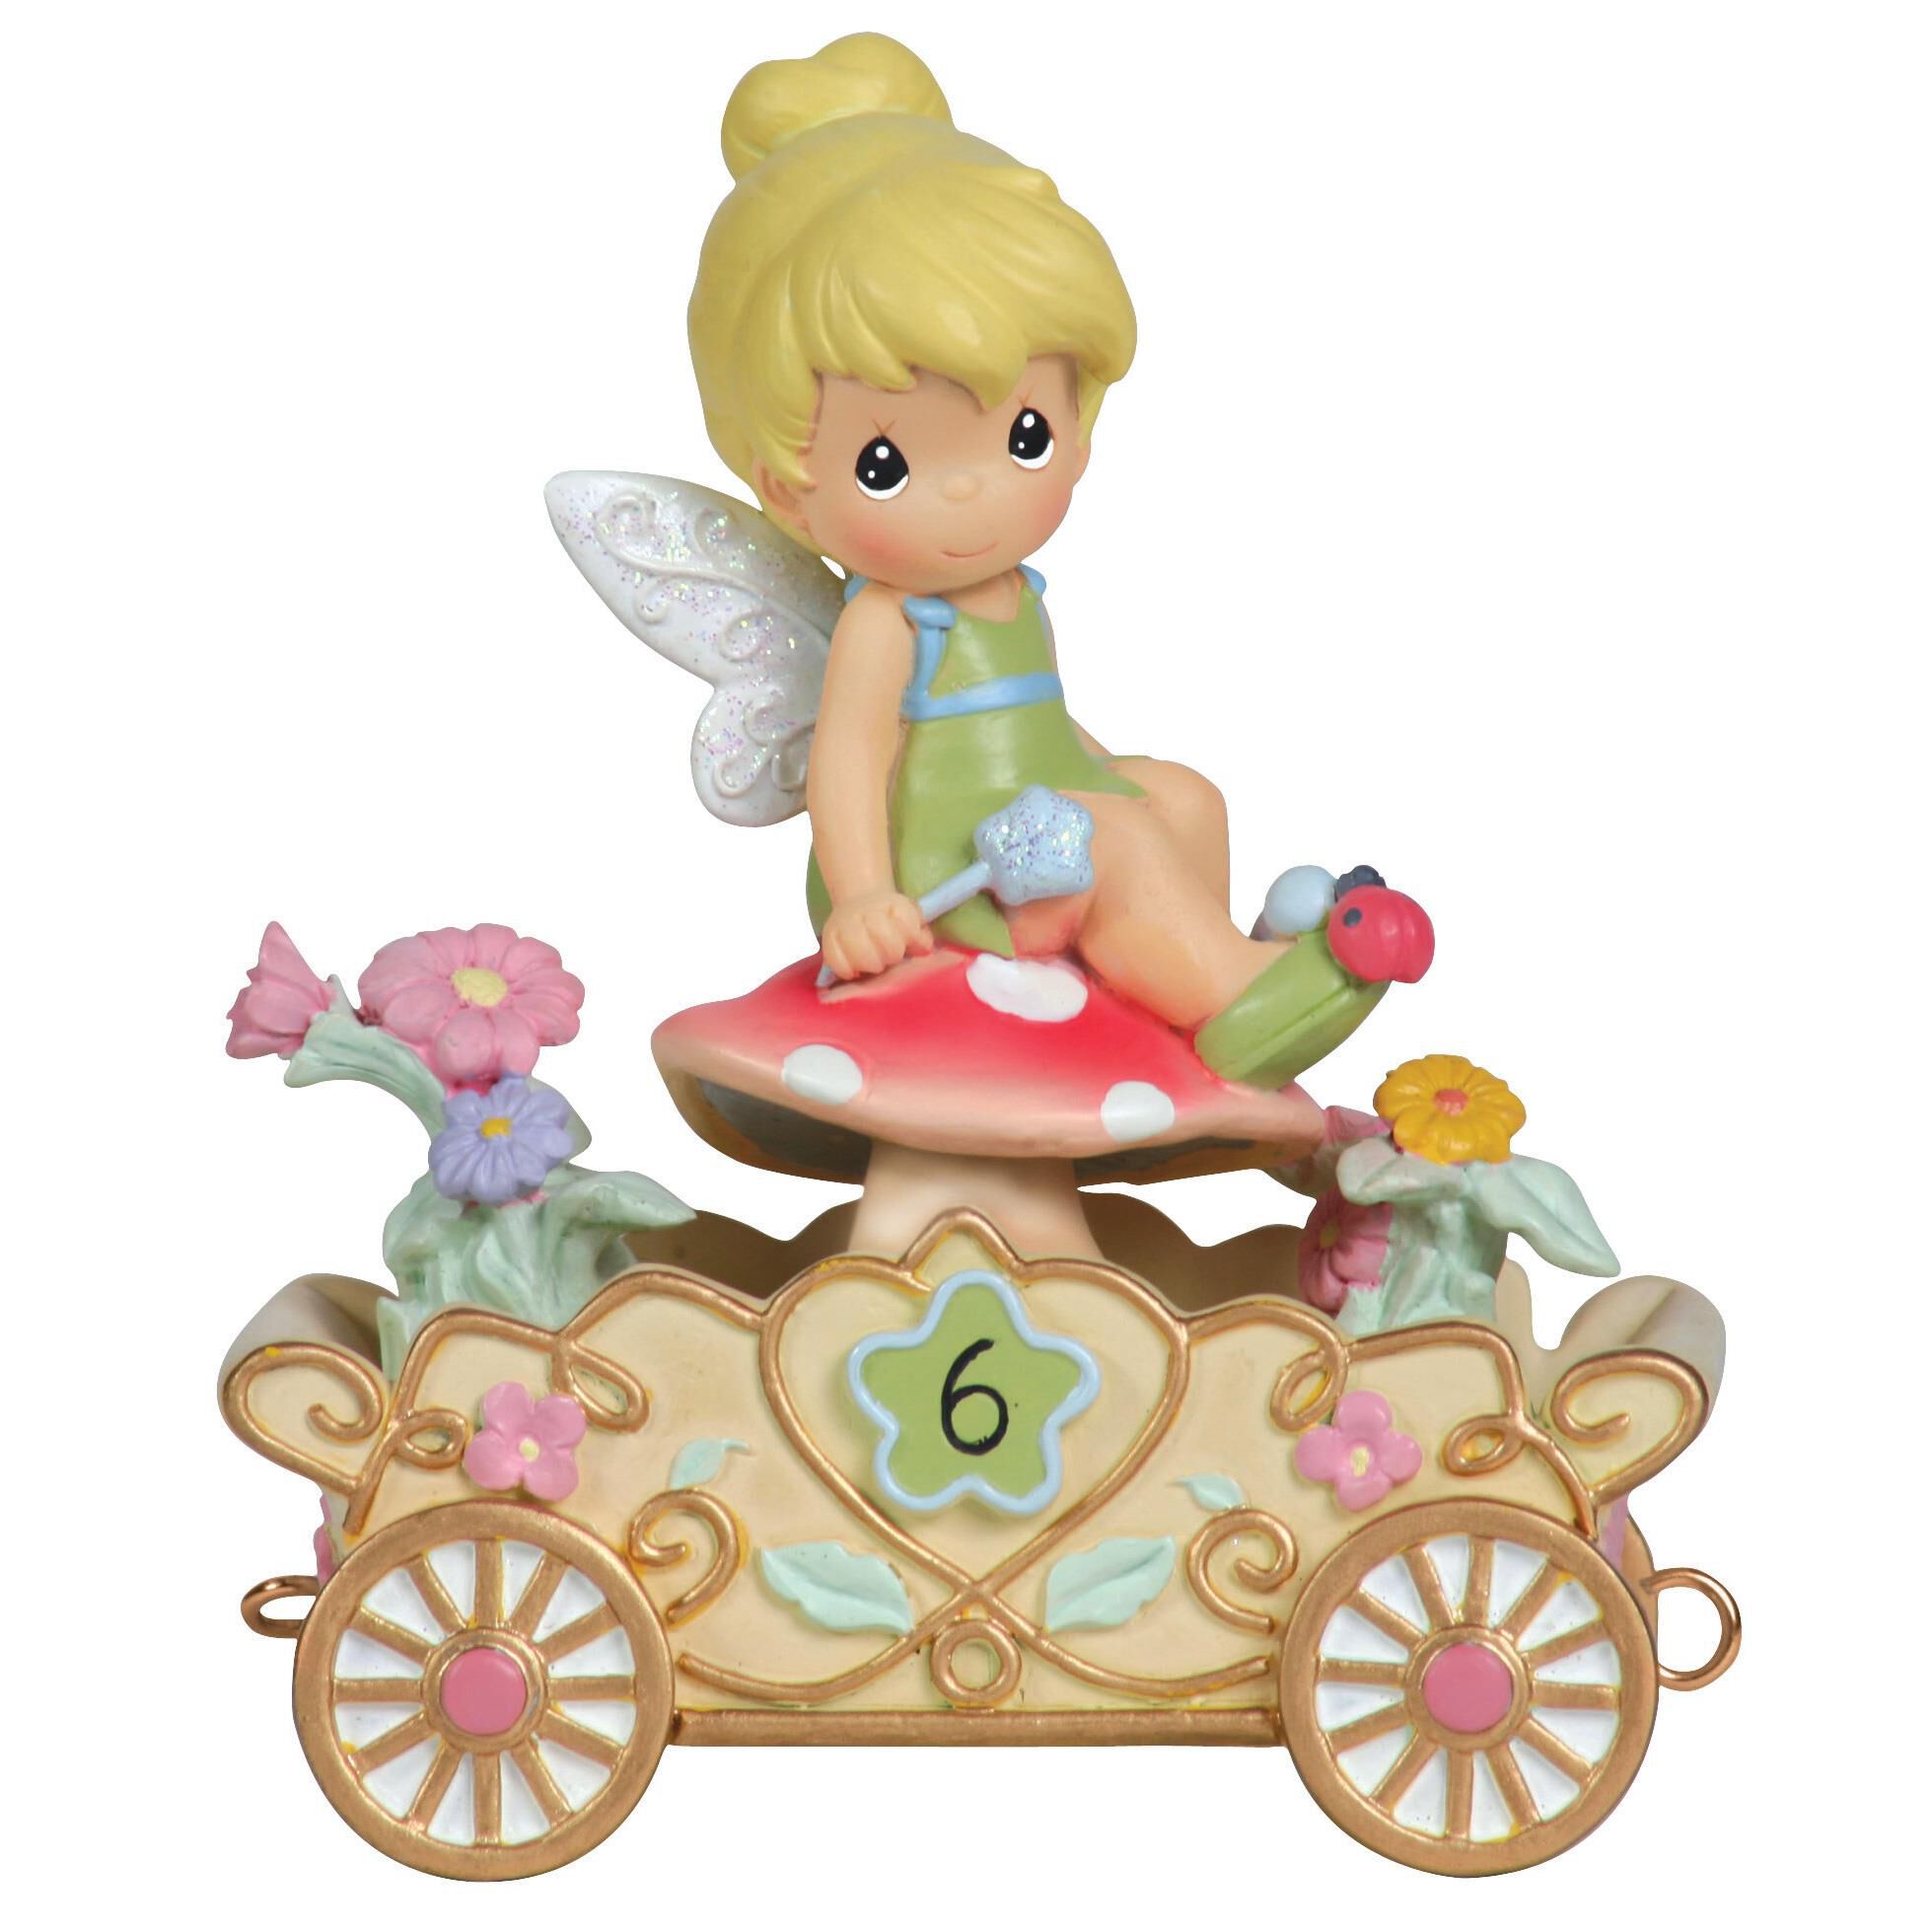 Disney CLASSIC TINKER BELL from Peter Pan 12" Precious Moments Doll NEW 